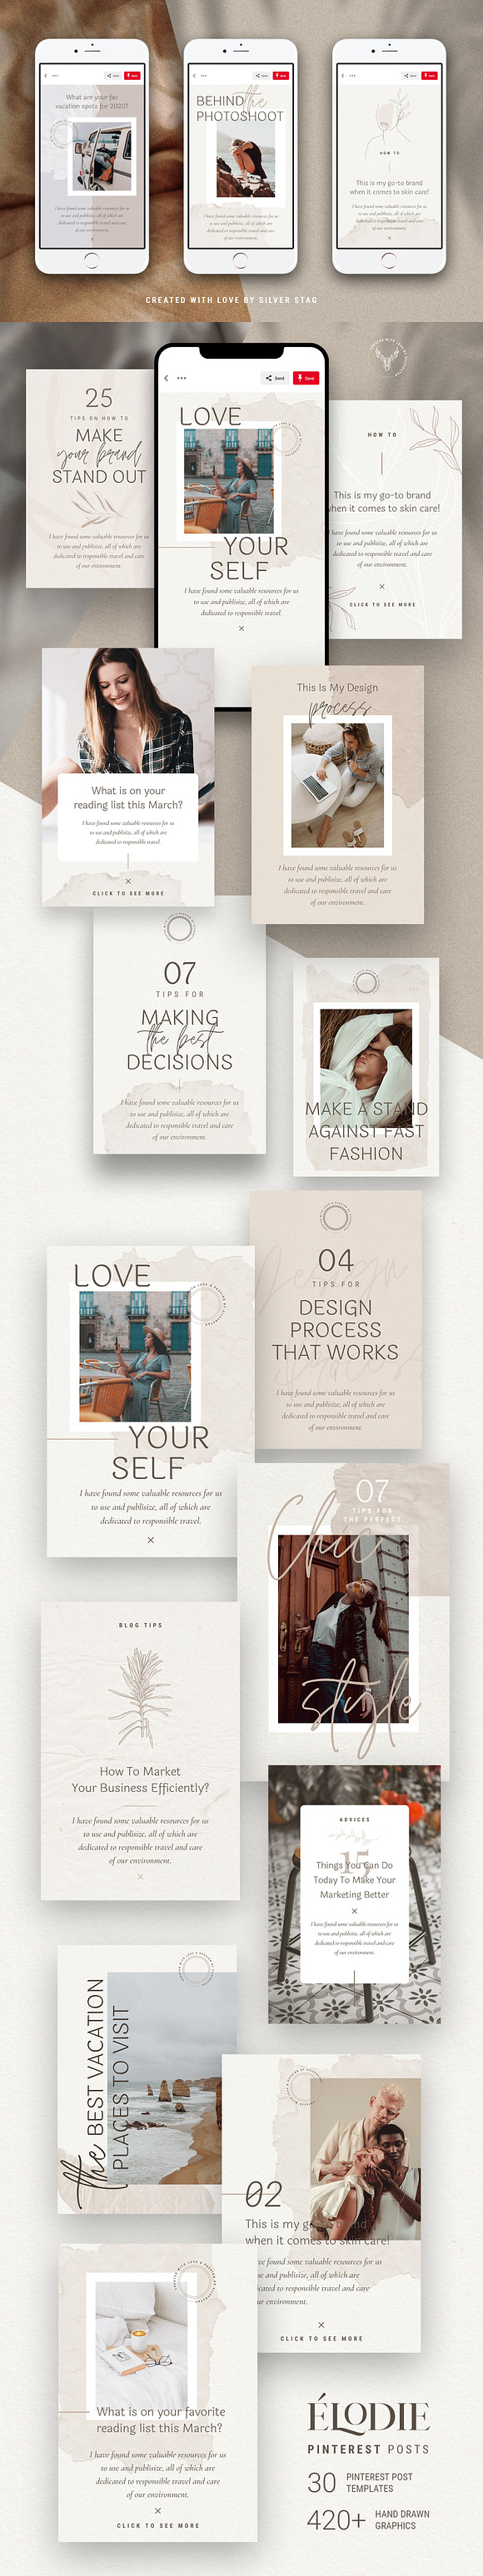 Elodie - Canva Pinterest Templates in Pinterest Templates - product preview 17